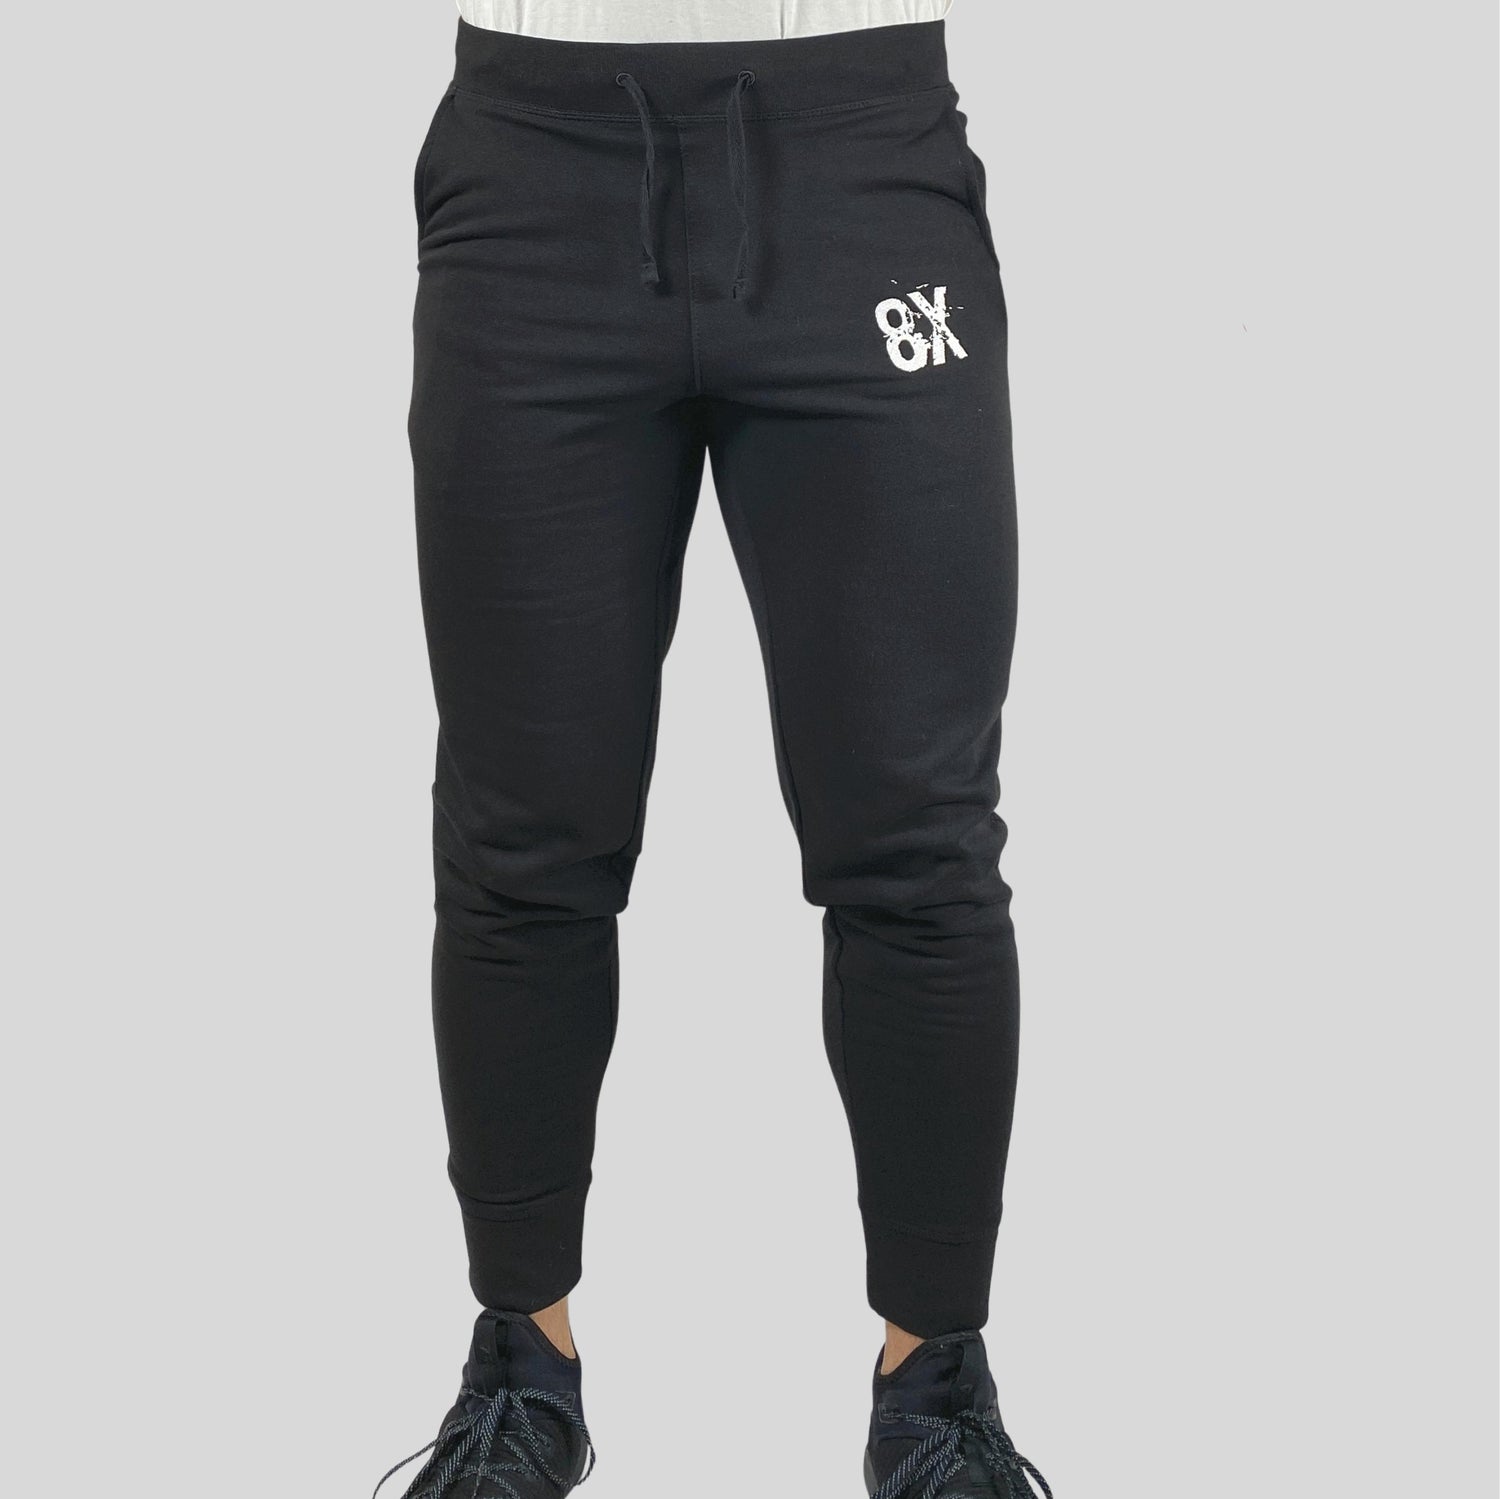 EVERYDAY, Unisex Embroidered 8X Slim Cuffed Joggers